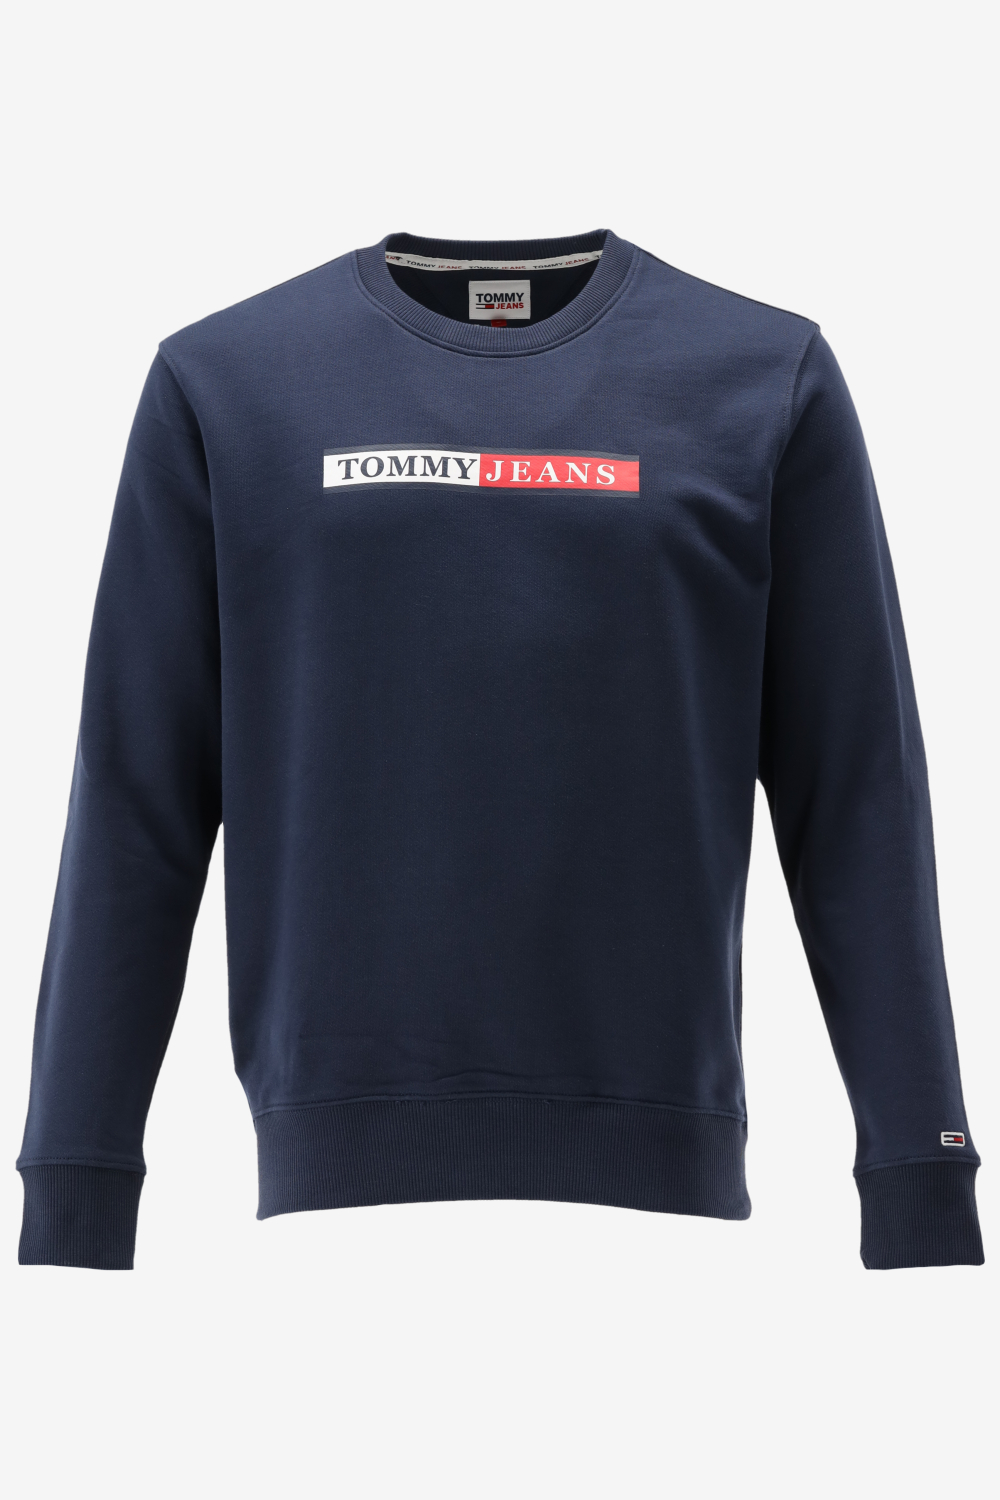 Tommy Jeans - Heren Sweaters Reg Essential Graphic Crew Sweater - Blauw - Maat L